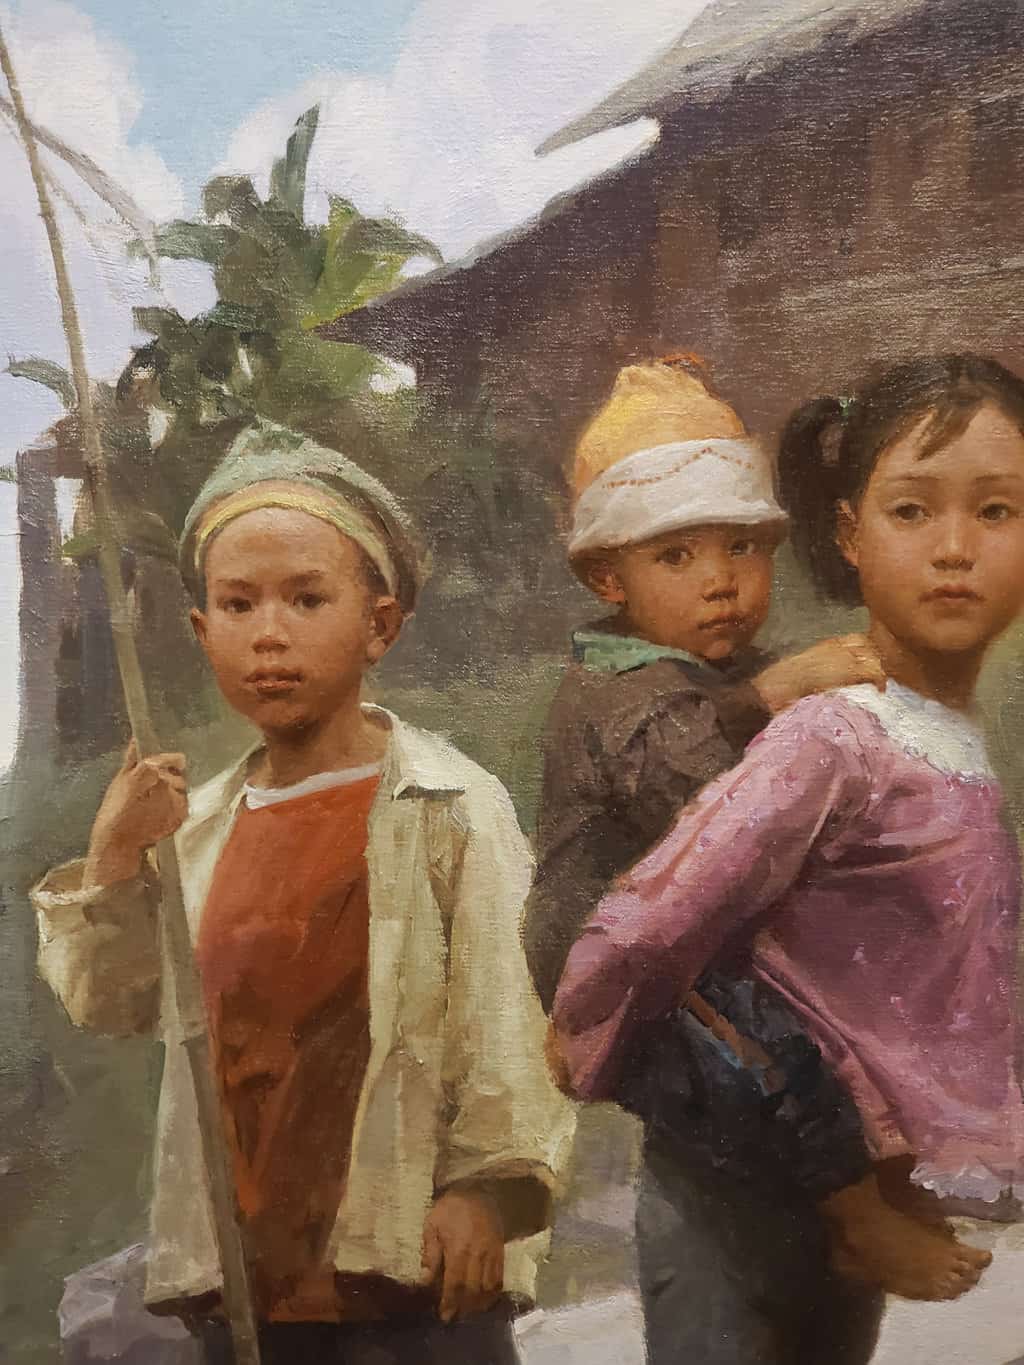 American Legacy Fine Arts presents "Goose Caretaker" a painting by Mian Situ.